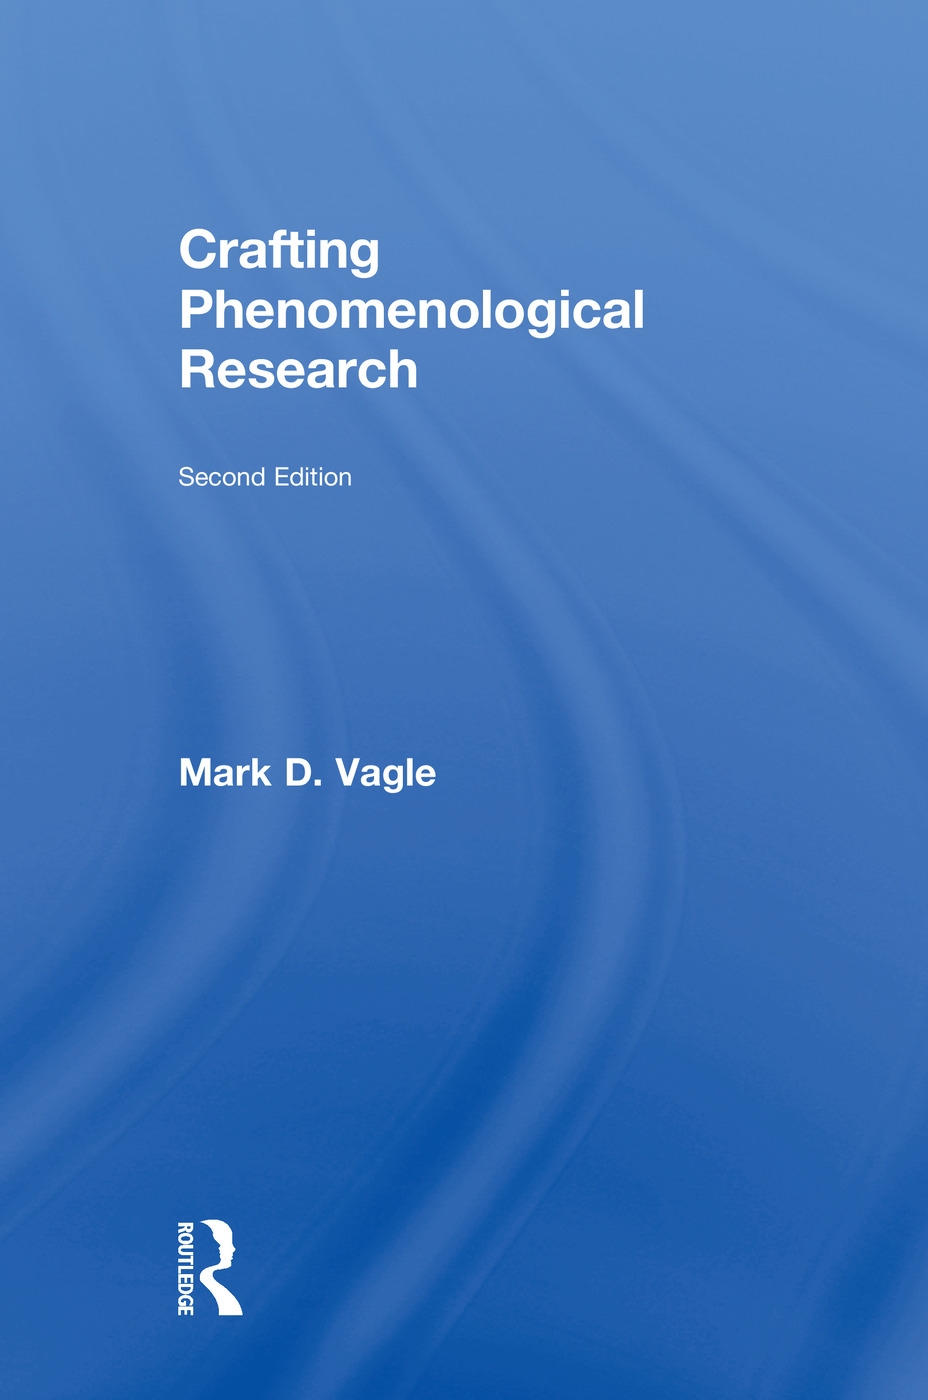 Crafting Phenomenological Research